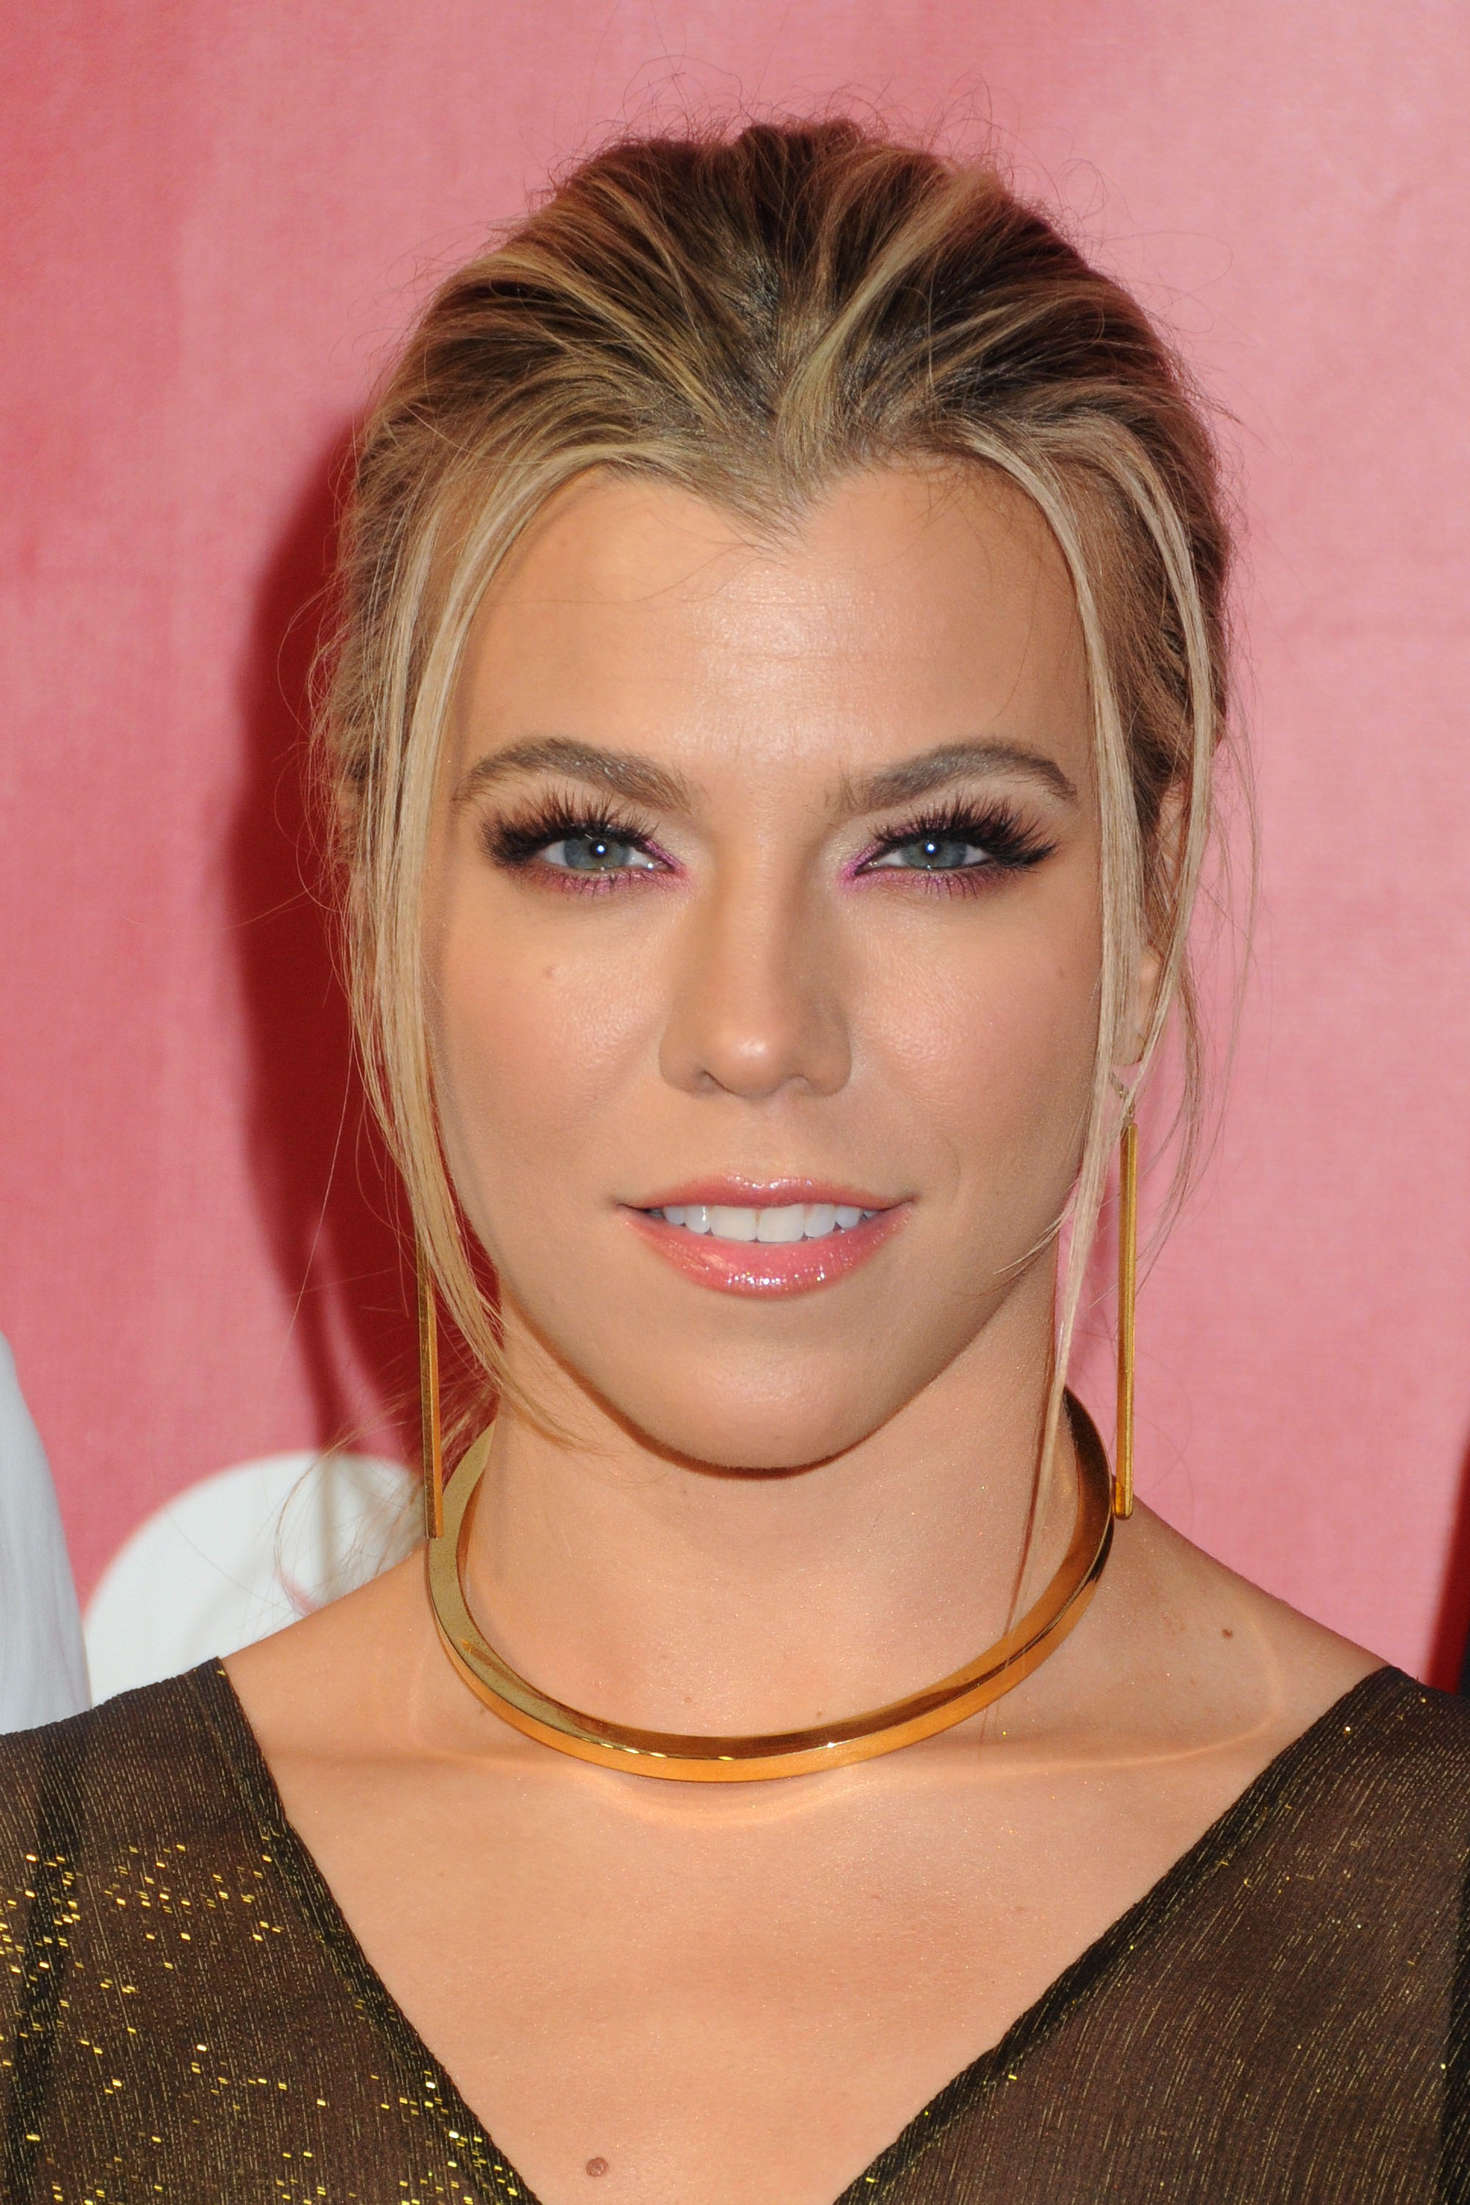 Kimberly Perry | Known people - famous people news and 